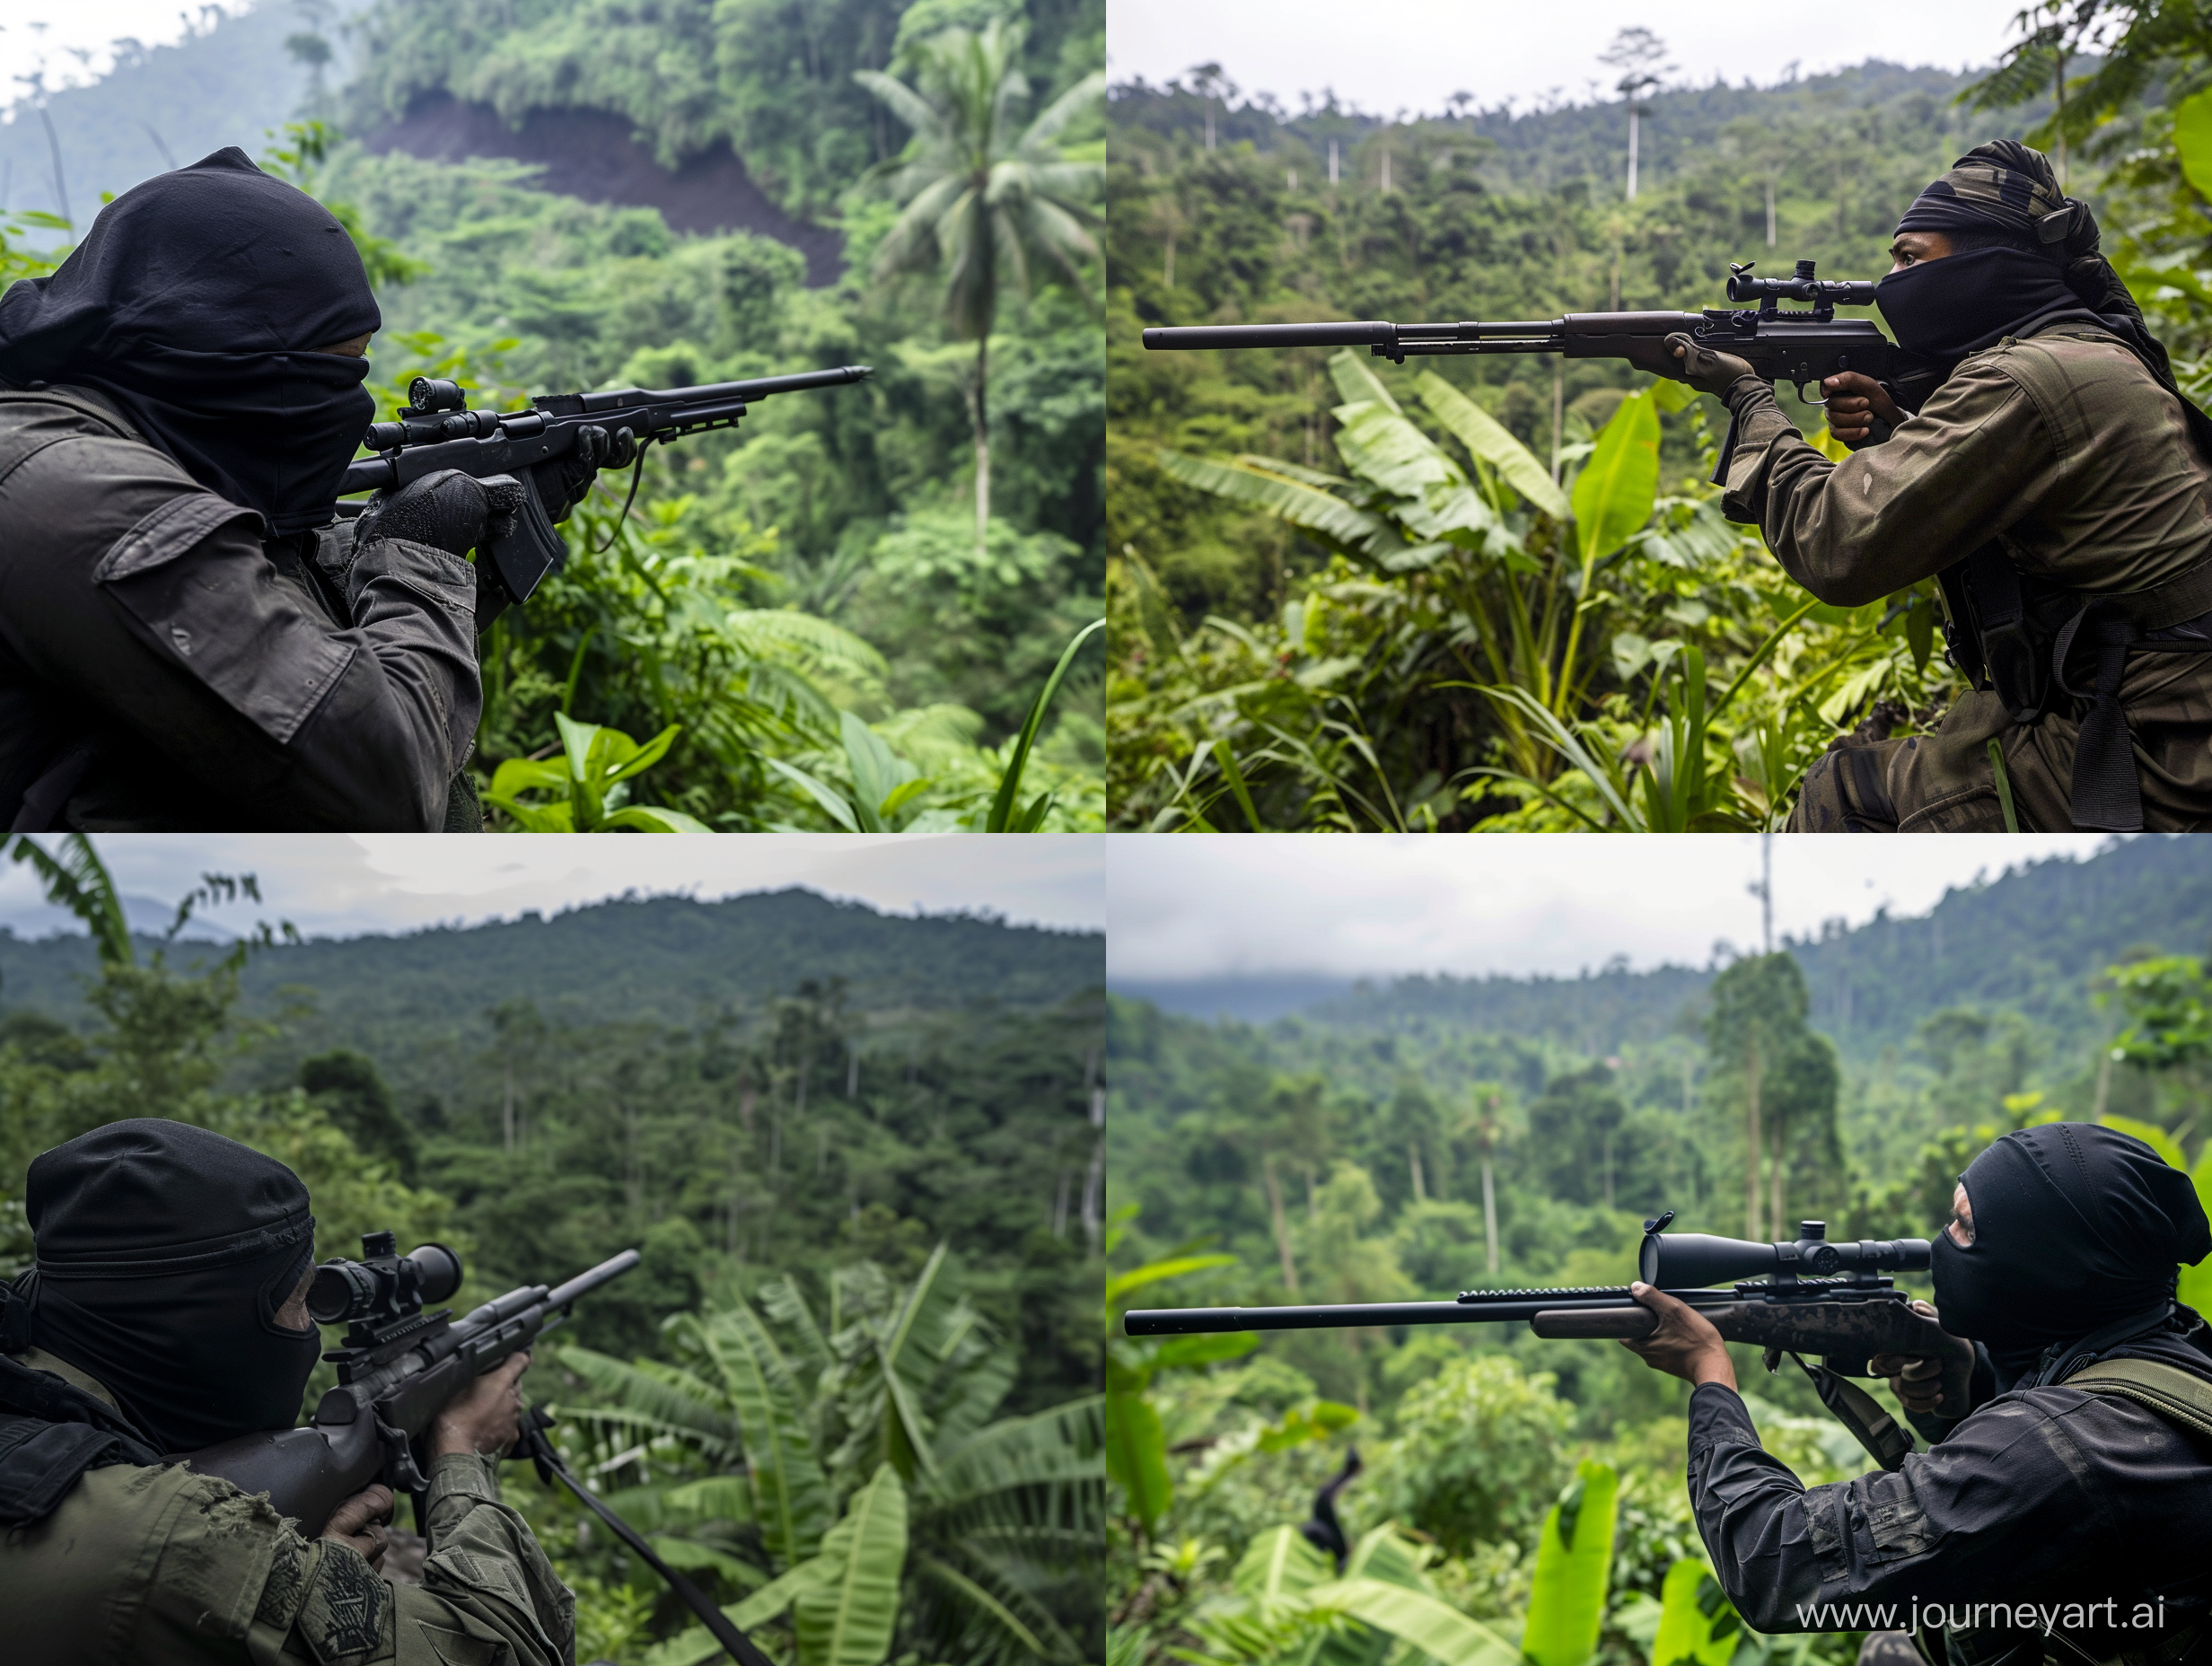 An Indonesian soldier wearing a black mask and holding a long rifle aims towards a ridge in a dense forest.